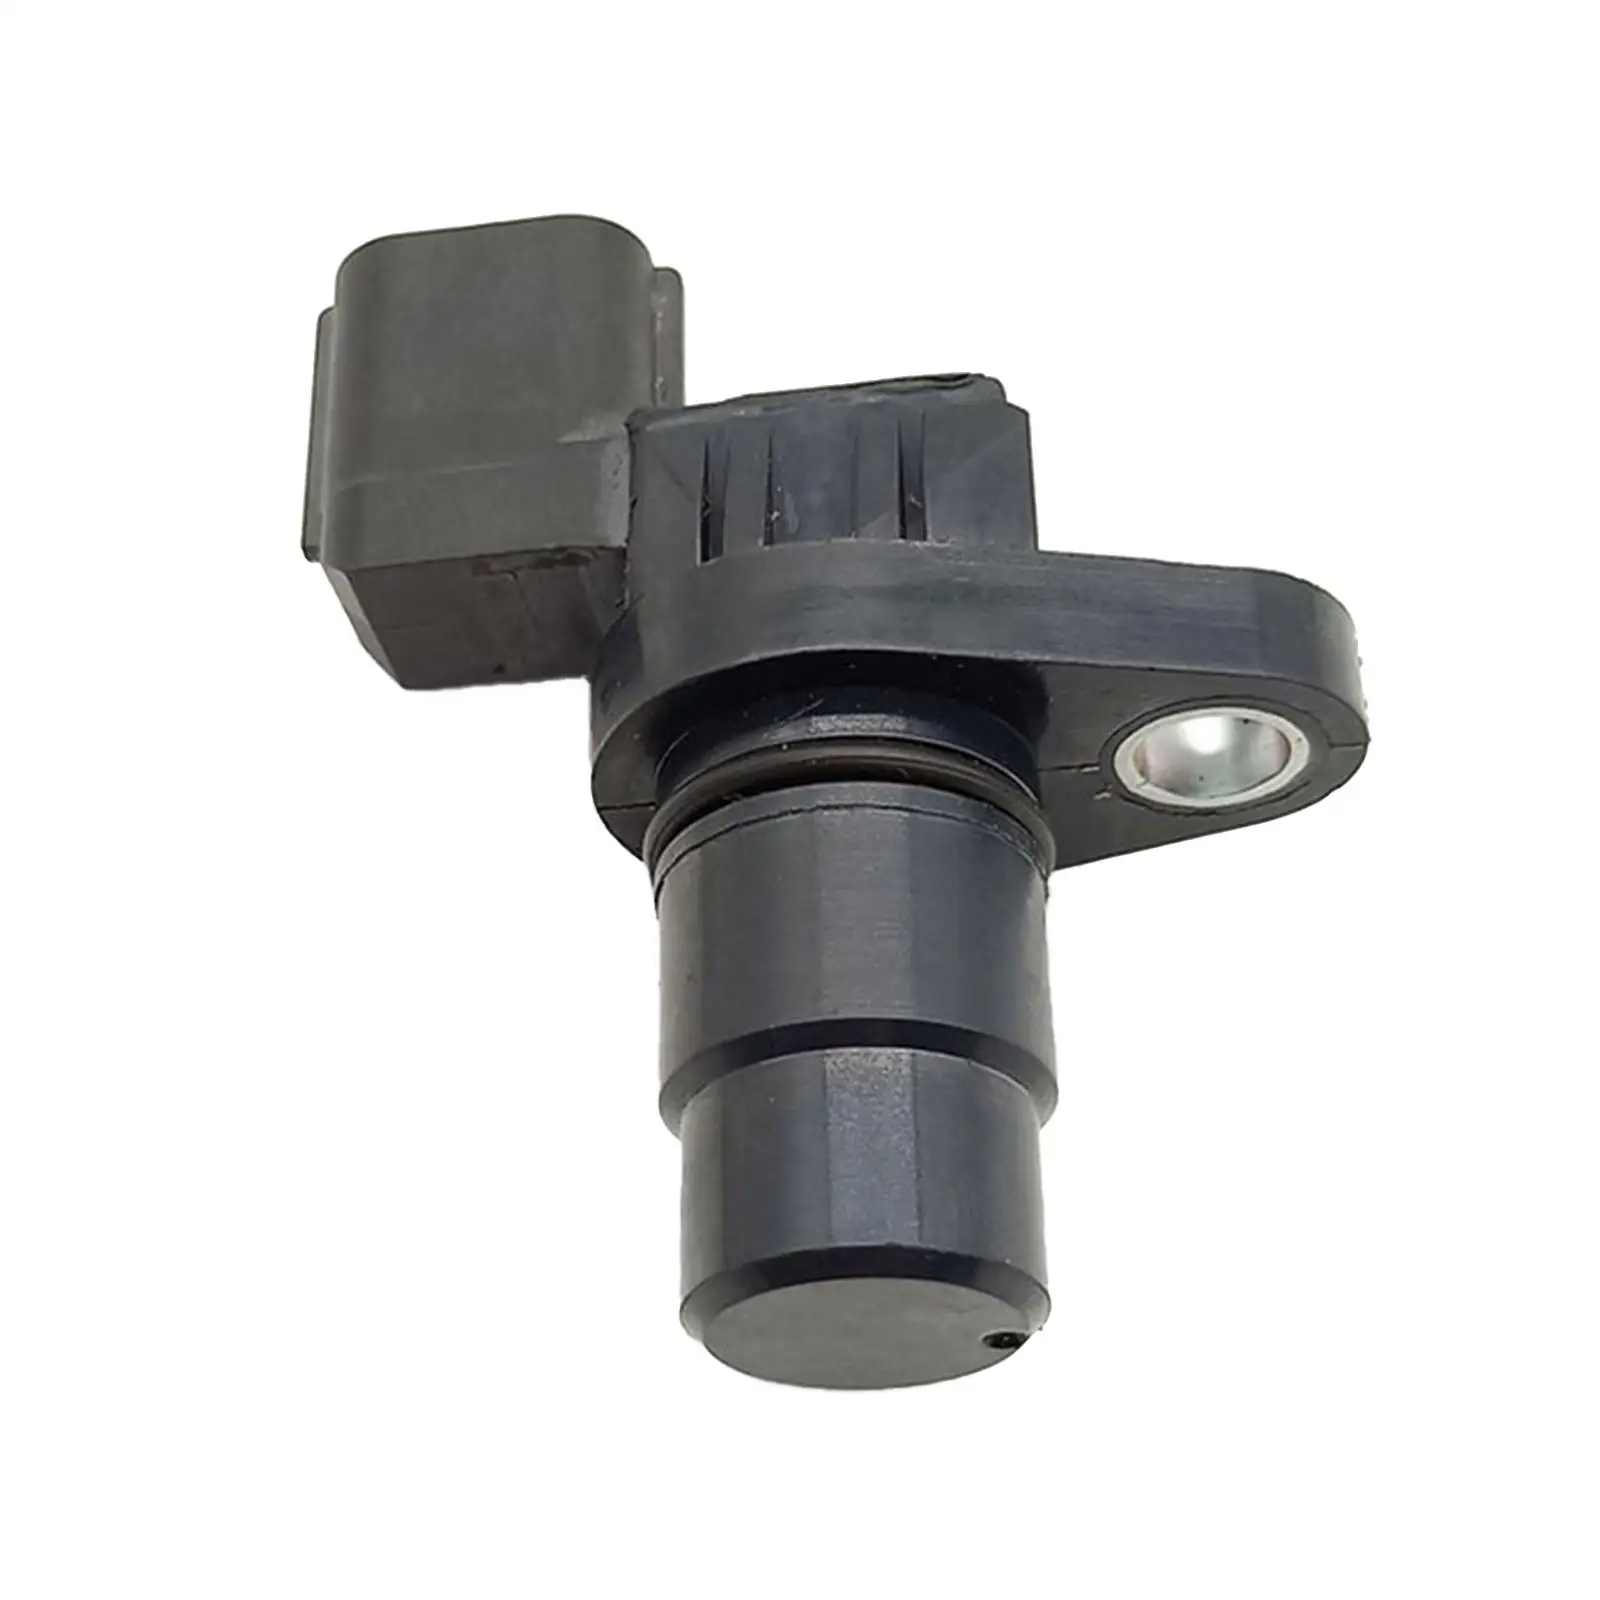 1x Automotive Transmission  Sensor,8941397202 Replacements 941352021 Brake System G004T07692A 3 4T07692A Fit for 